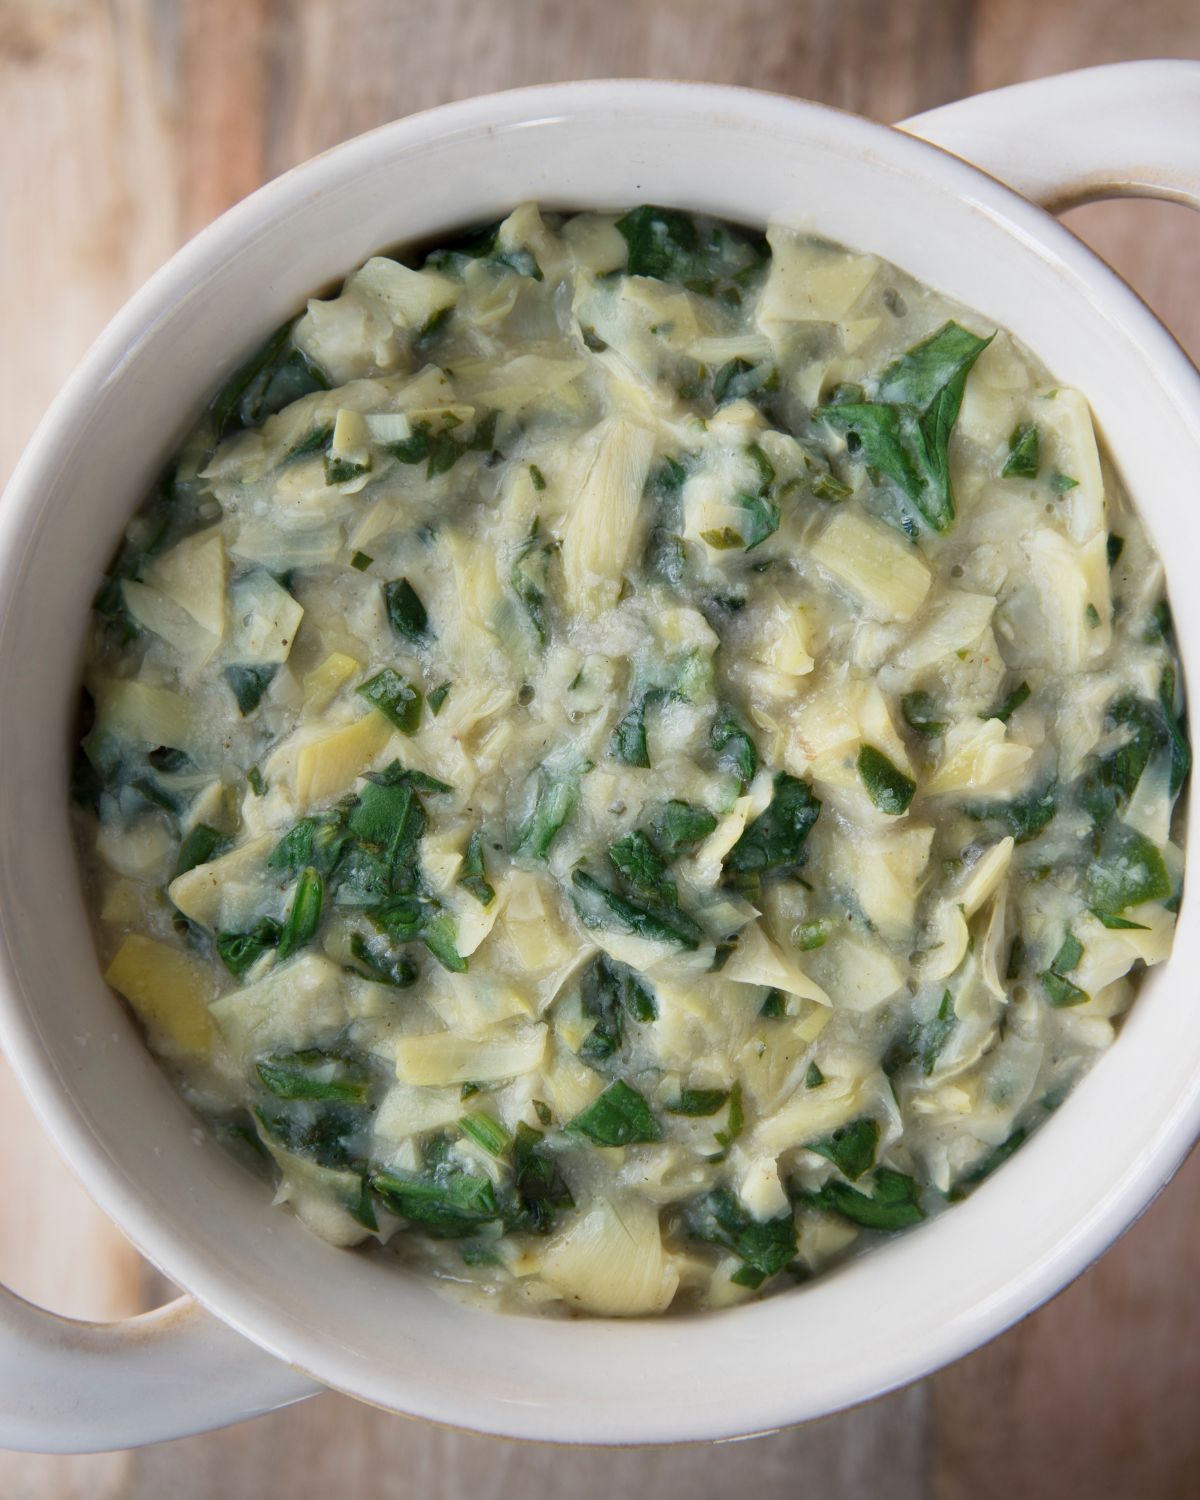 Spinach dip.